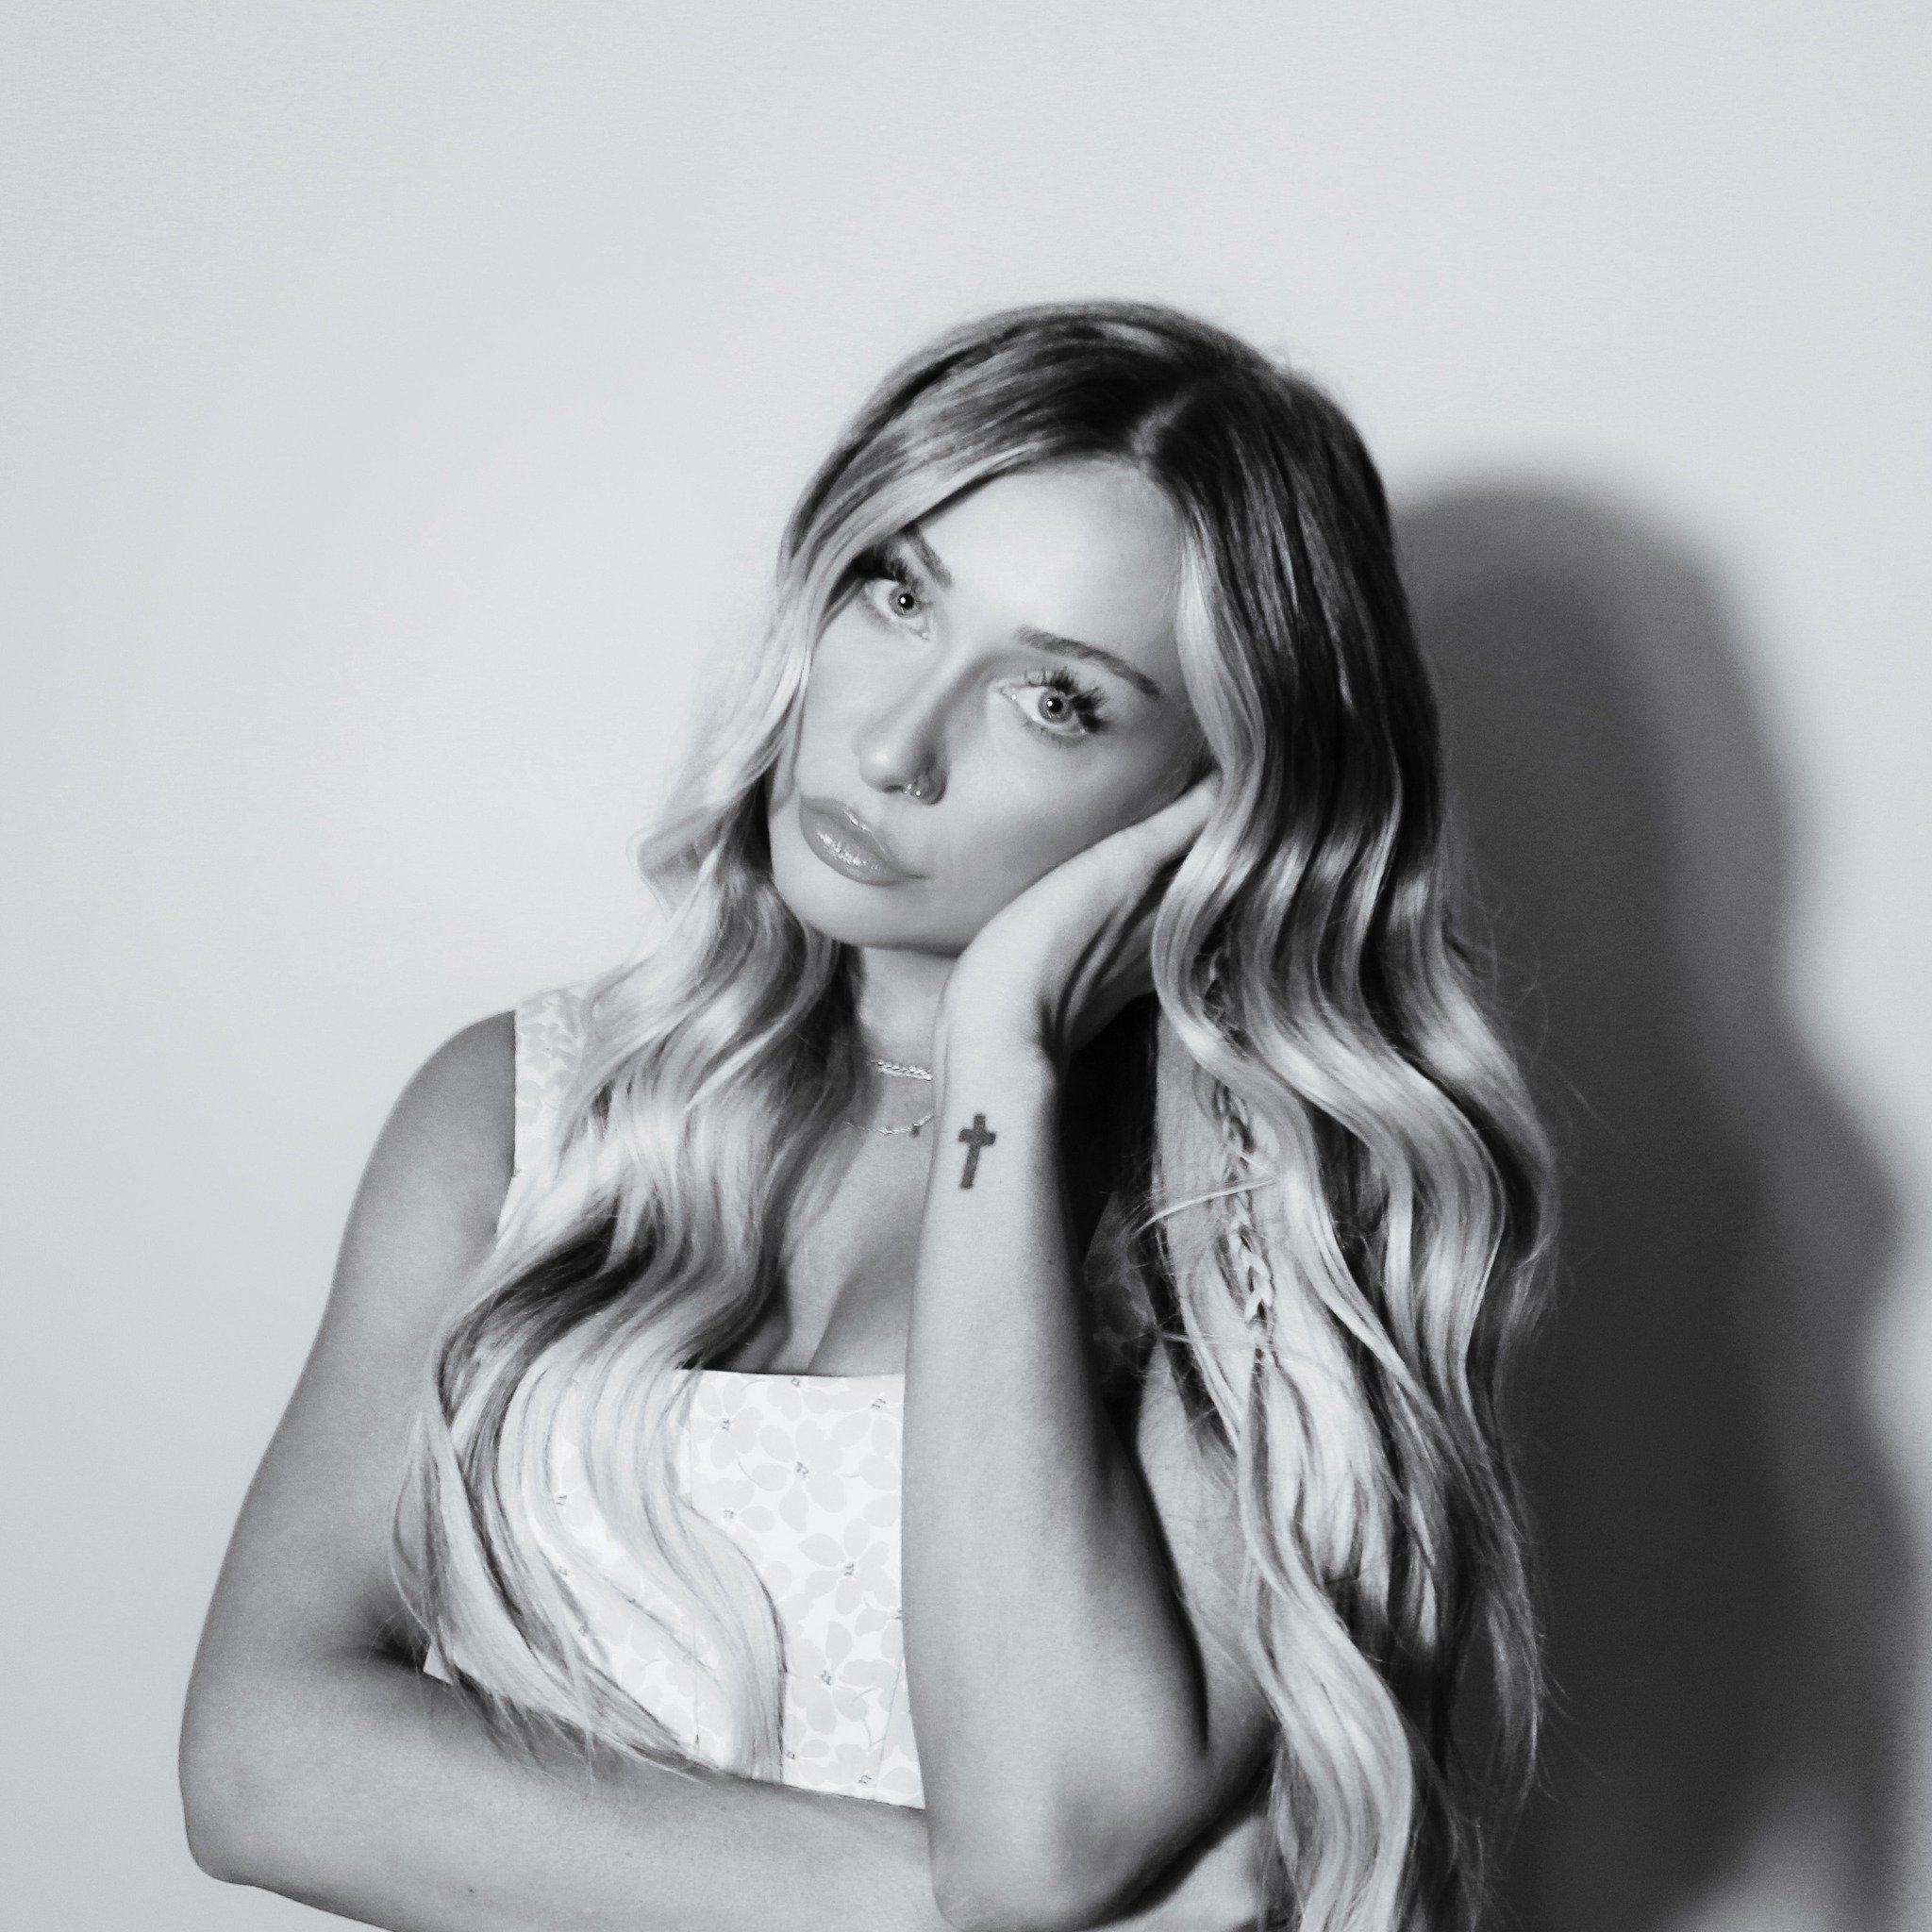 British Columbia native and country singer-songwriter @madelinemerlo will kick off the evening for seven-time Academy of Country Music Award winner @leebrice at the Festival at Sandpoint stage on Thursday, August 1.

Tickets are selling fast! Get you